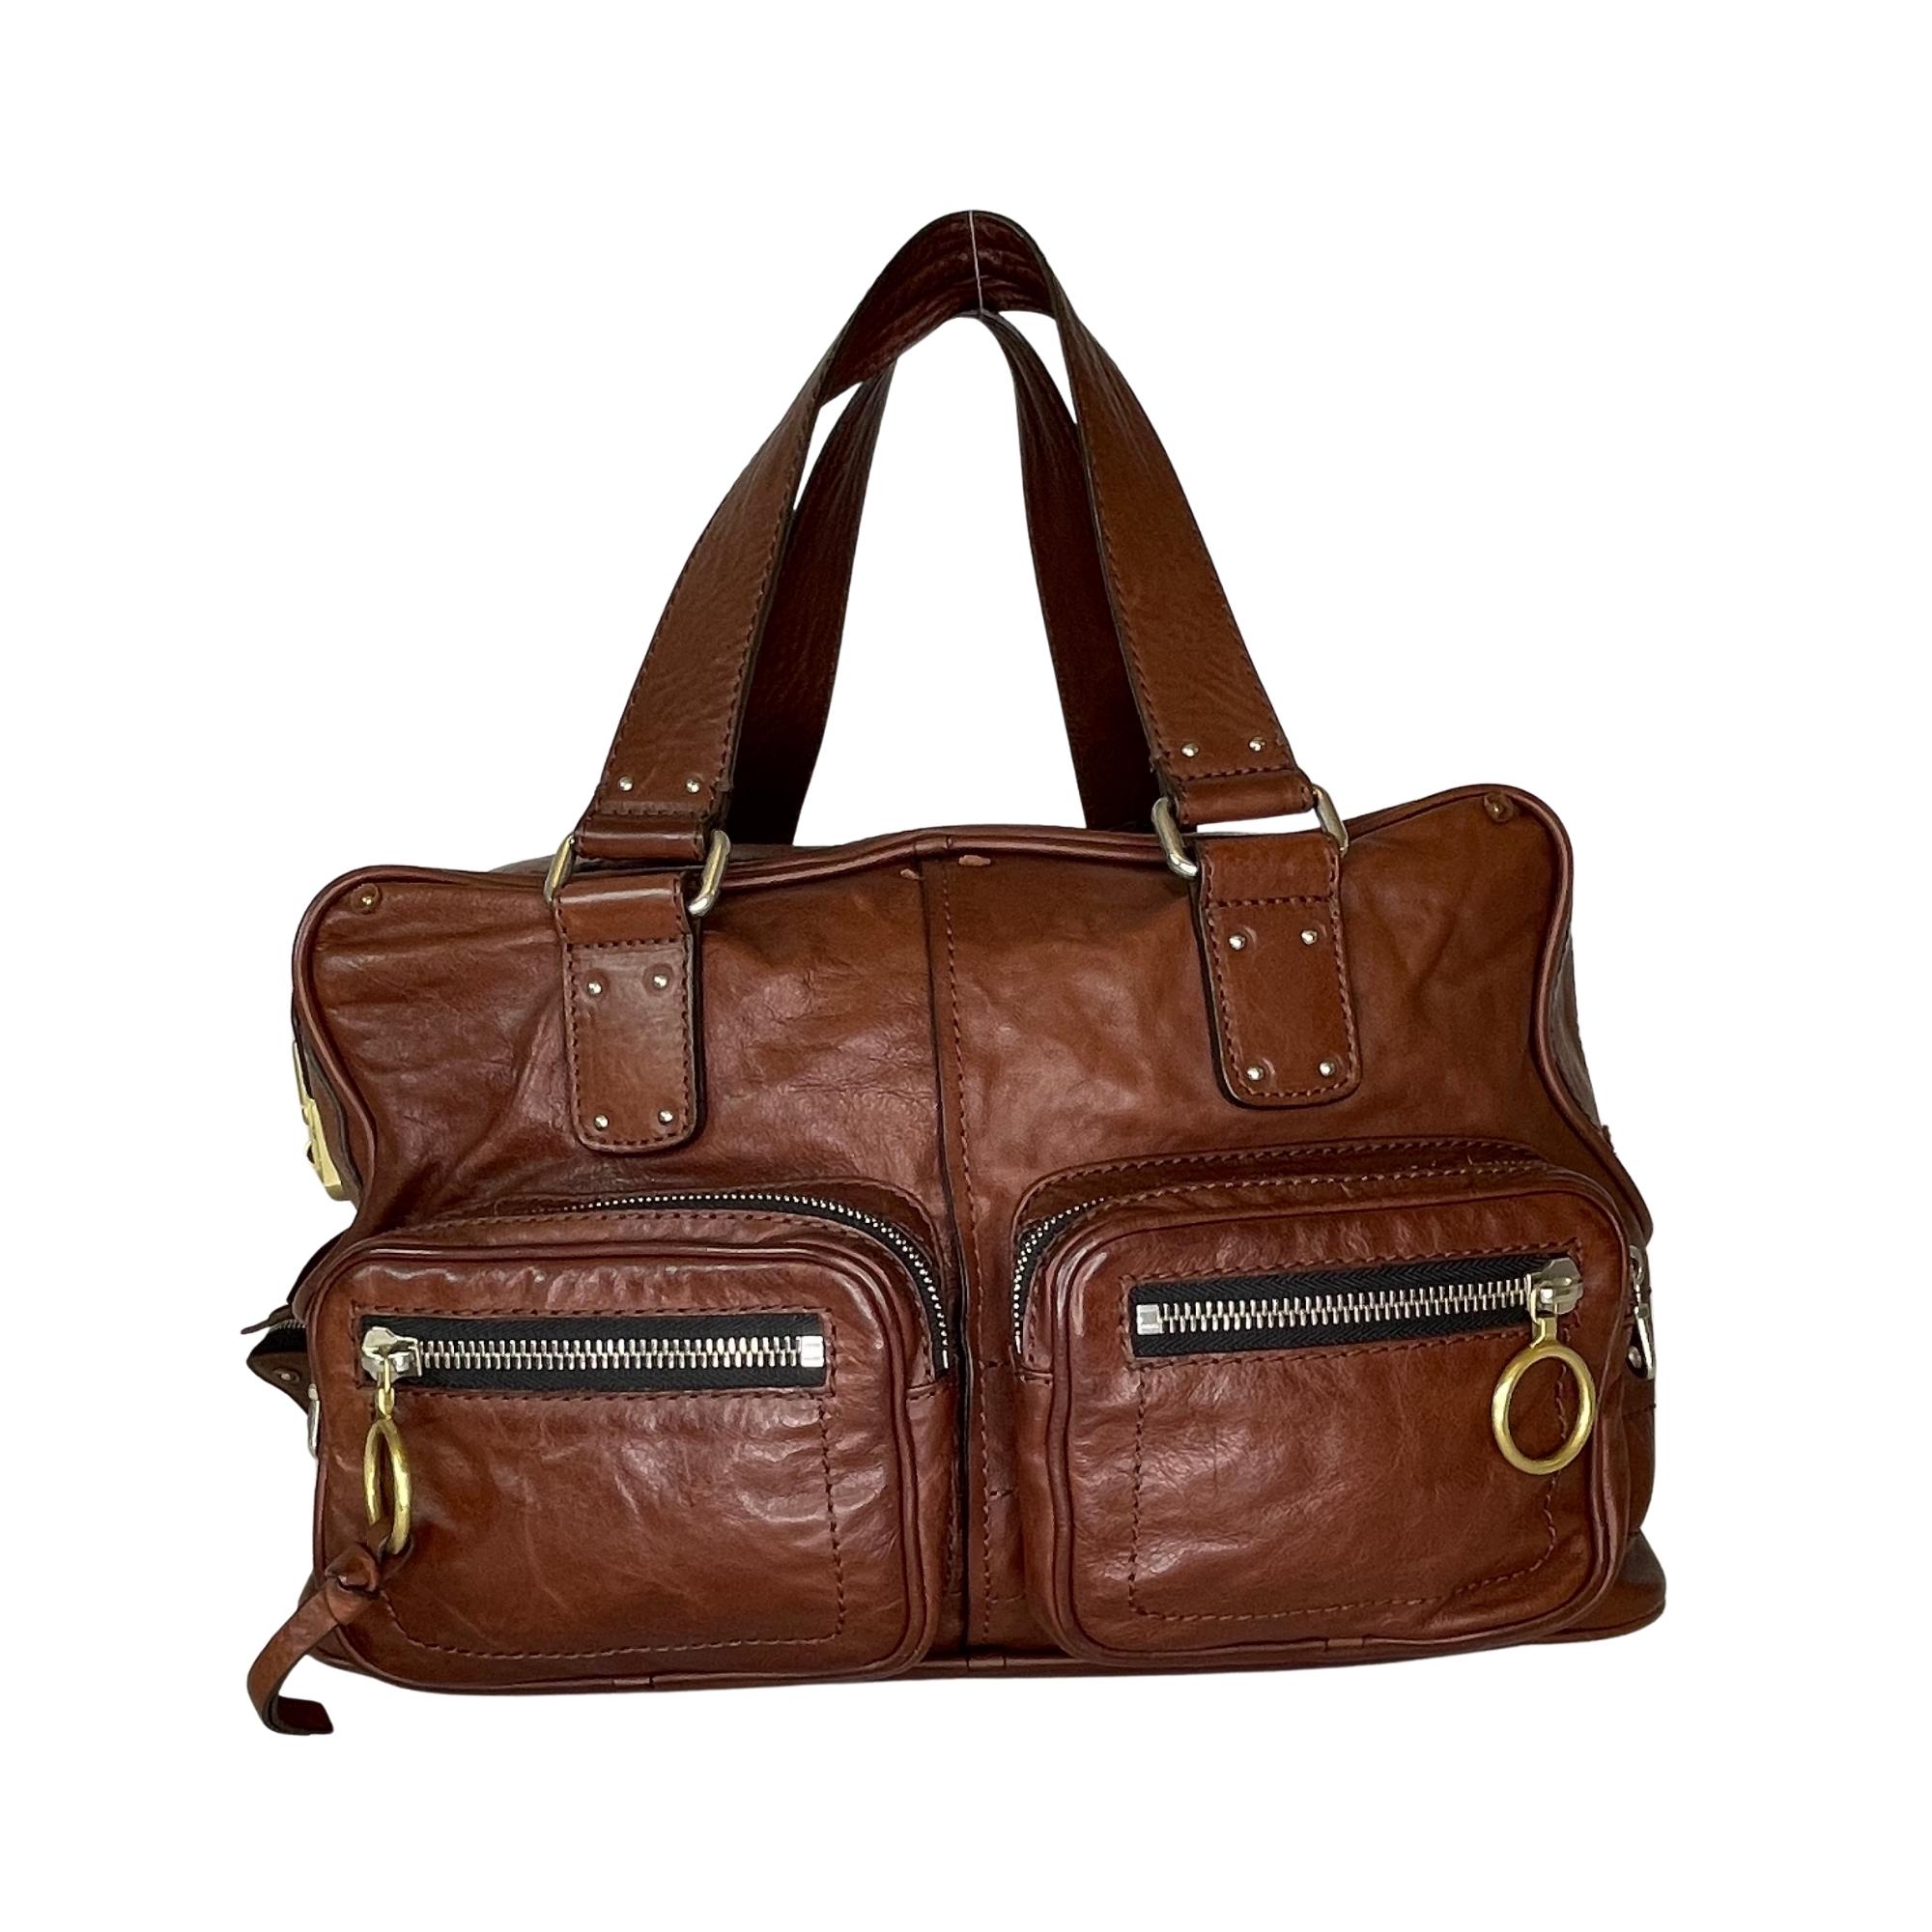 The Betty bag features a leather body, front and back exterior zip pockets, top zip closure, interior zip pockets, and a leather coin case attached to the top of the bag.

COLOR: Brown
MATERIAL: Calf leather
ITEM CODE: 01 - 06 - 53
MEASURES: L 16” x